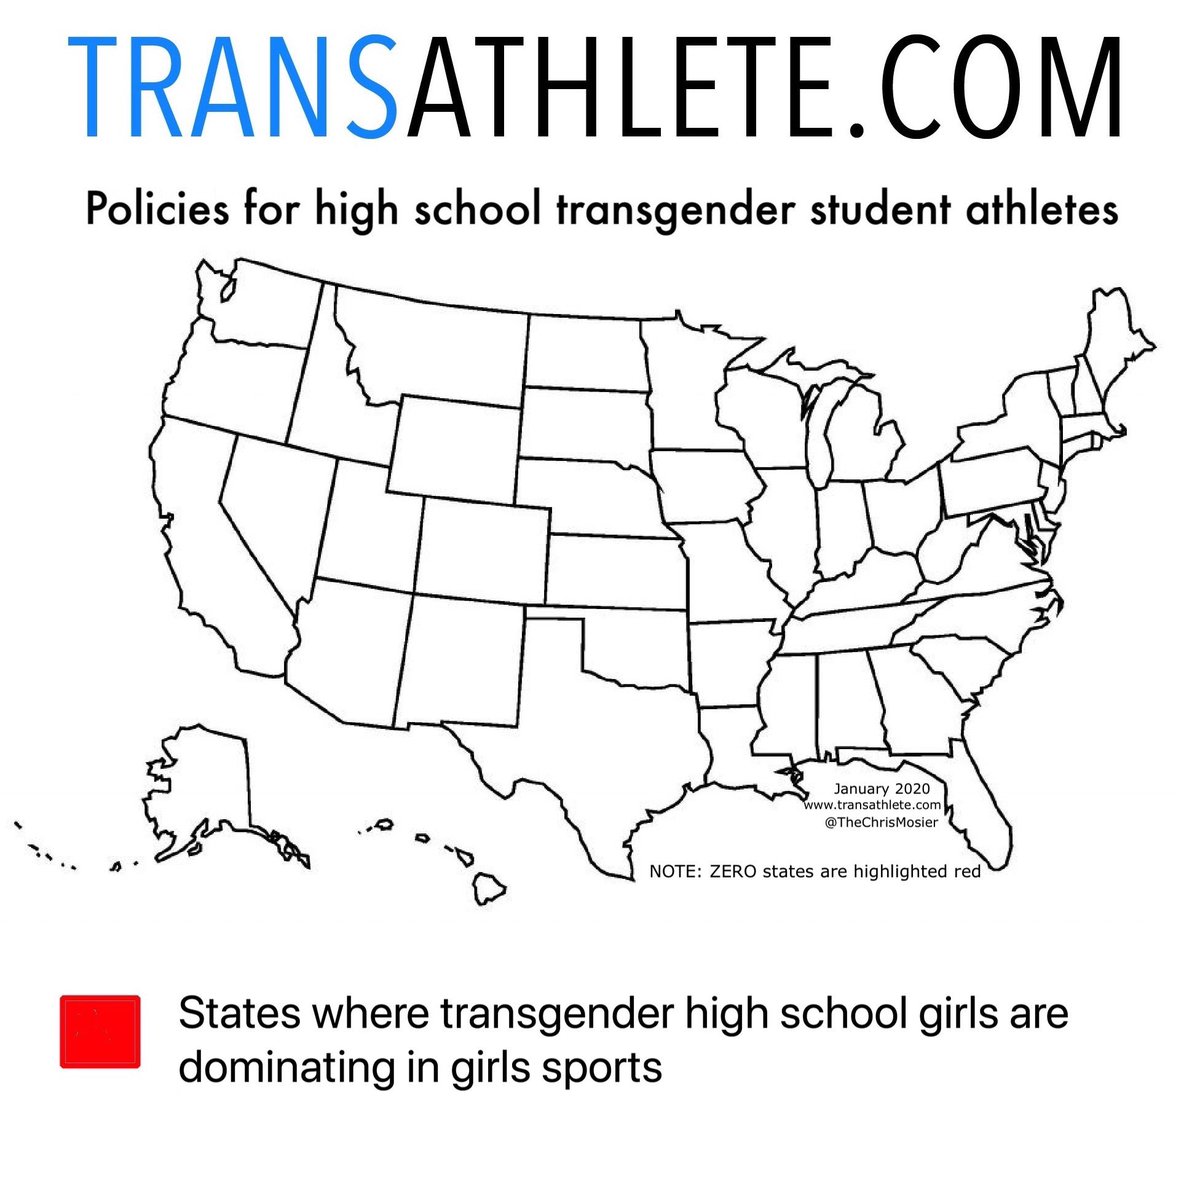 In the USA High Schools we have seen only two athletes out of 18 states that have excelled but they have not dominated or are anywhere near their age group national record level.25-